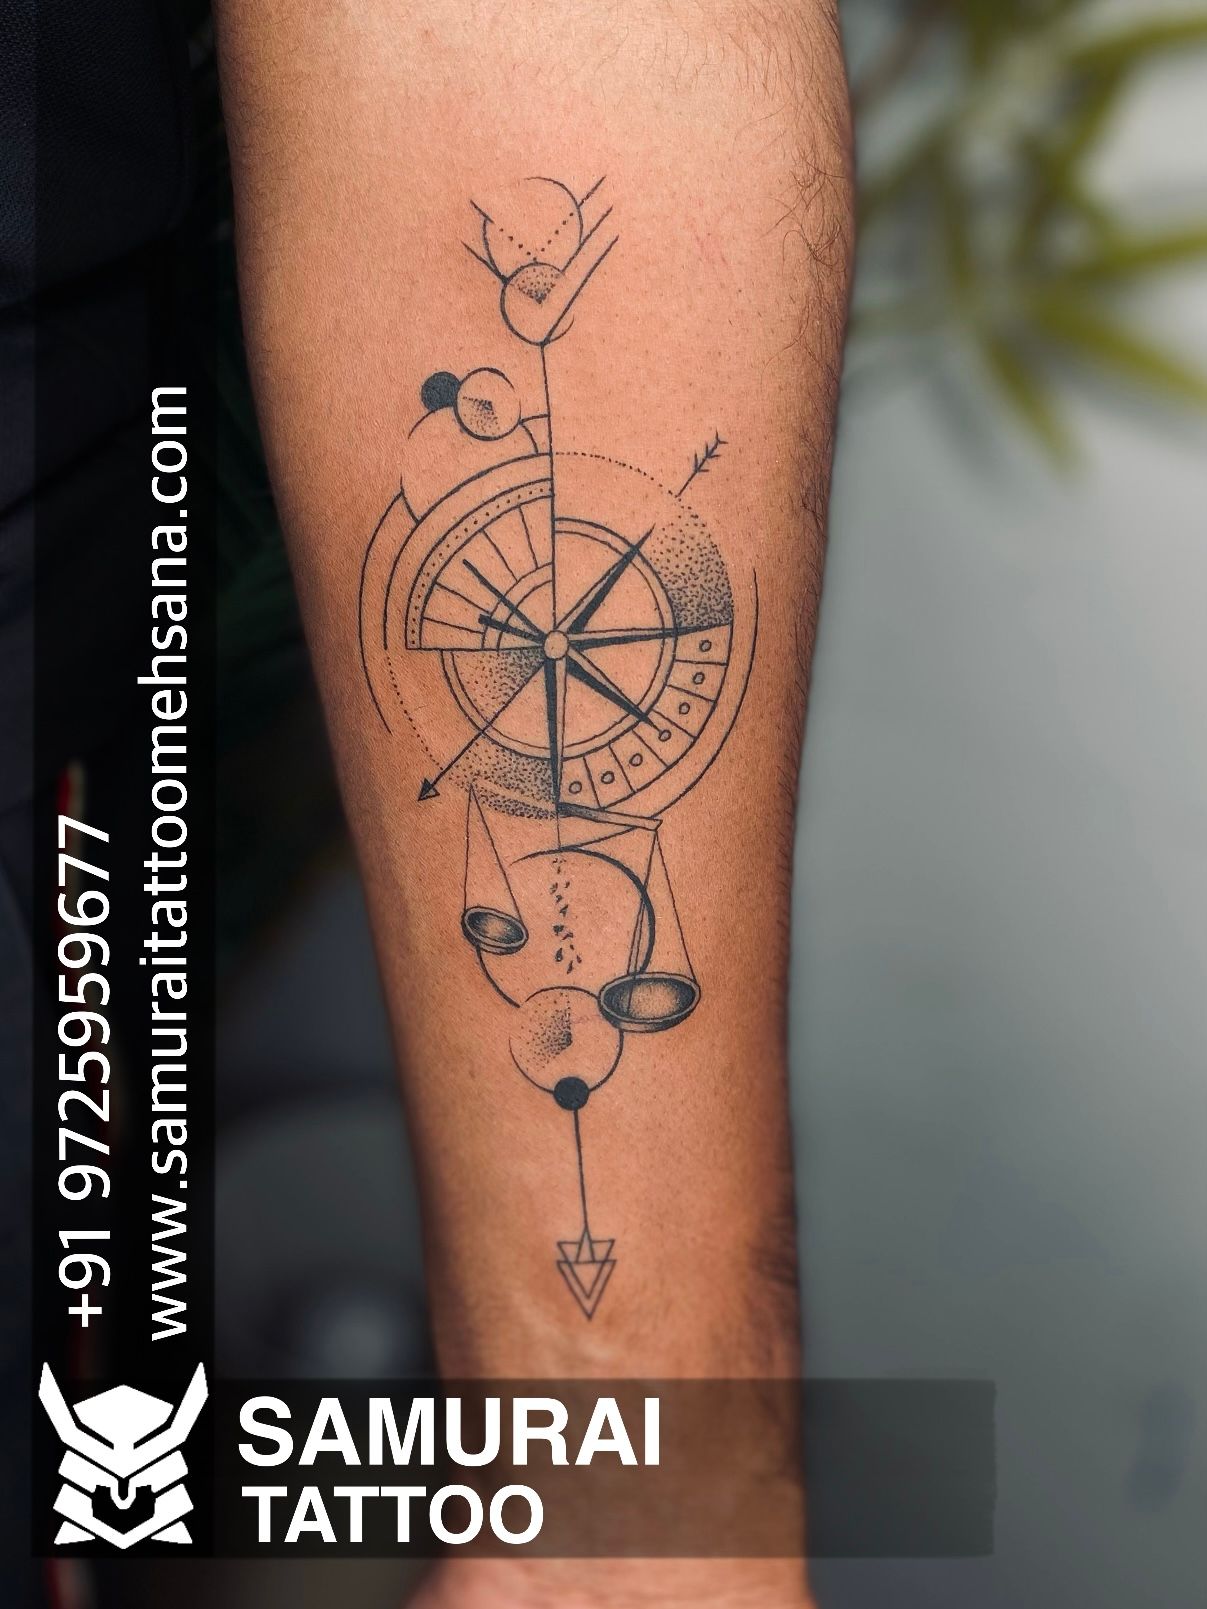 komstec Eagle With Compass Tattoo Waterproof Sticker Temporary Body Tattoo  - Price in India, Buy komstec Eagle With Compass Tattoo Waterproof Sticker  Temporary Body Tattoo Online In India, Reviews, Ratings & Features |